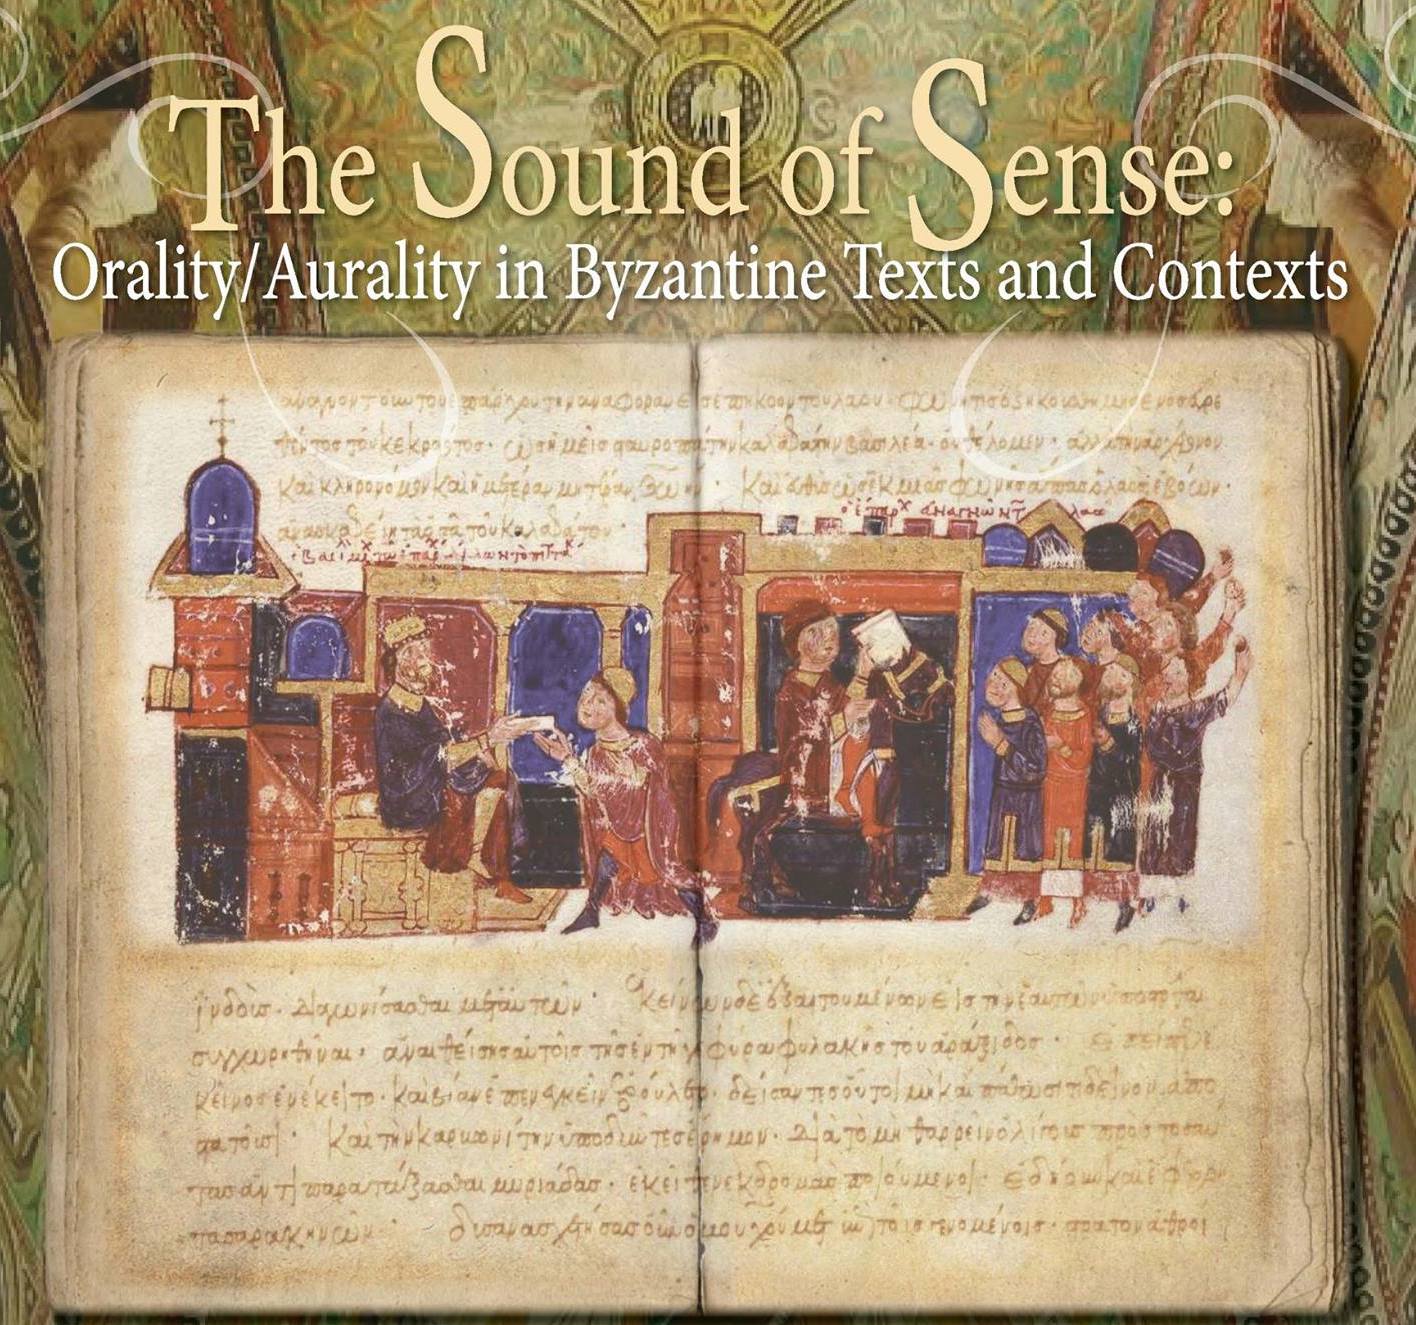 The Sound of Sense: Orality/Aurality in Byzantine Texts and Contexts lead image